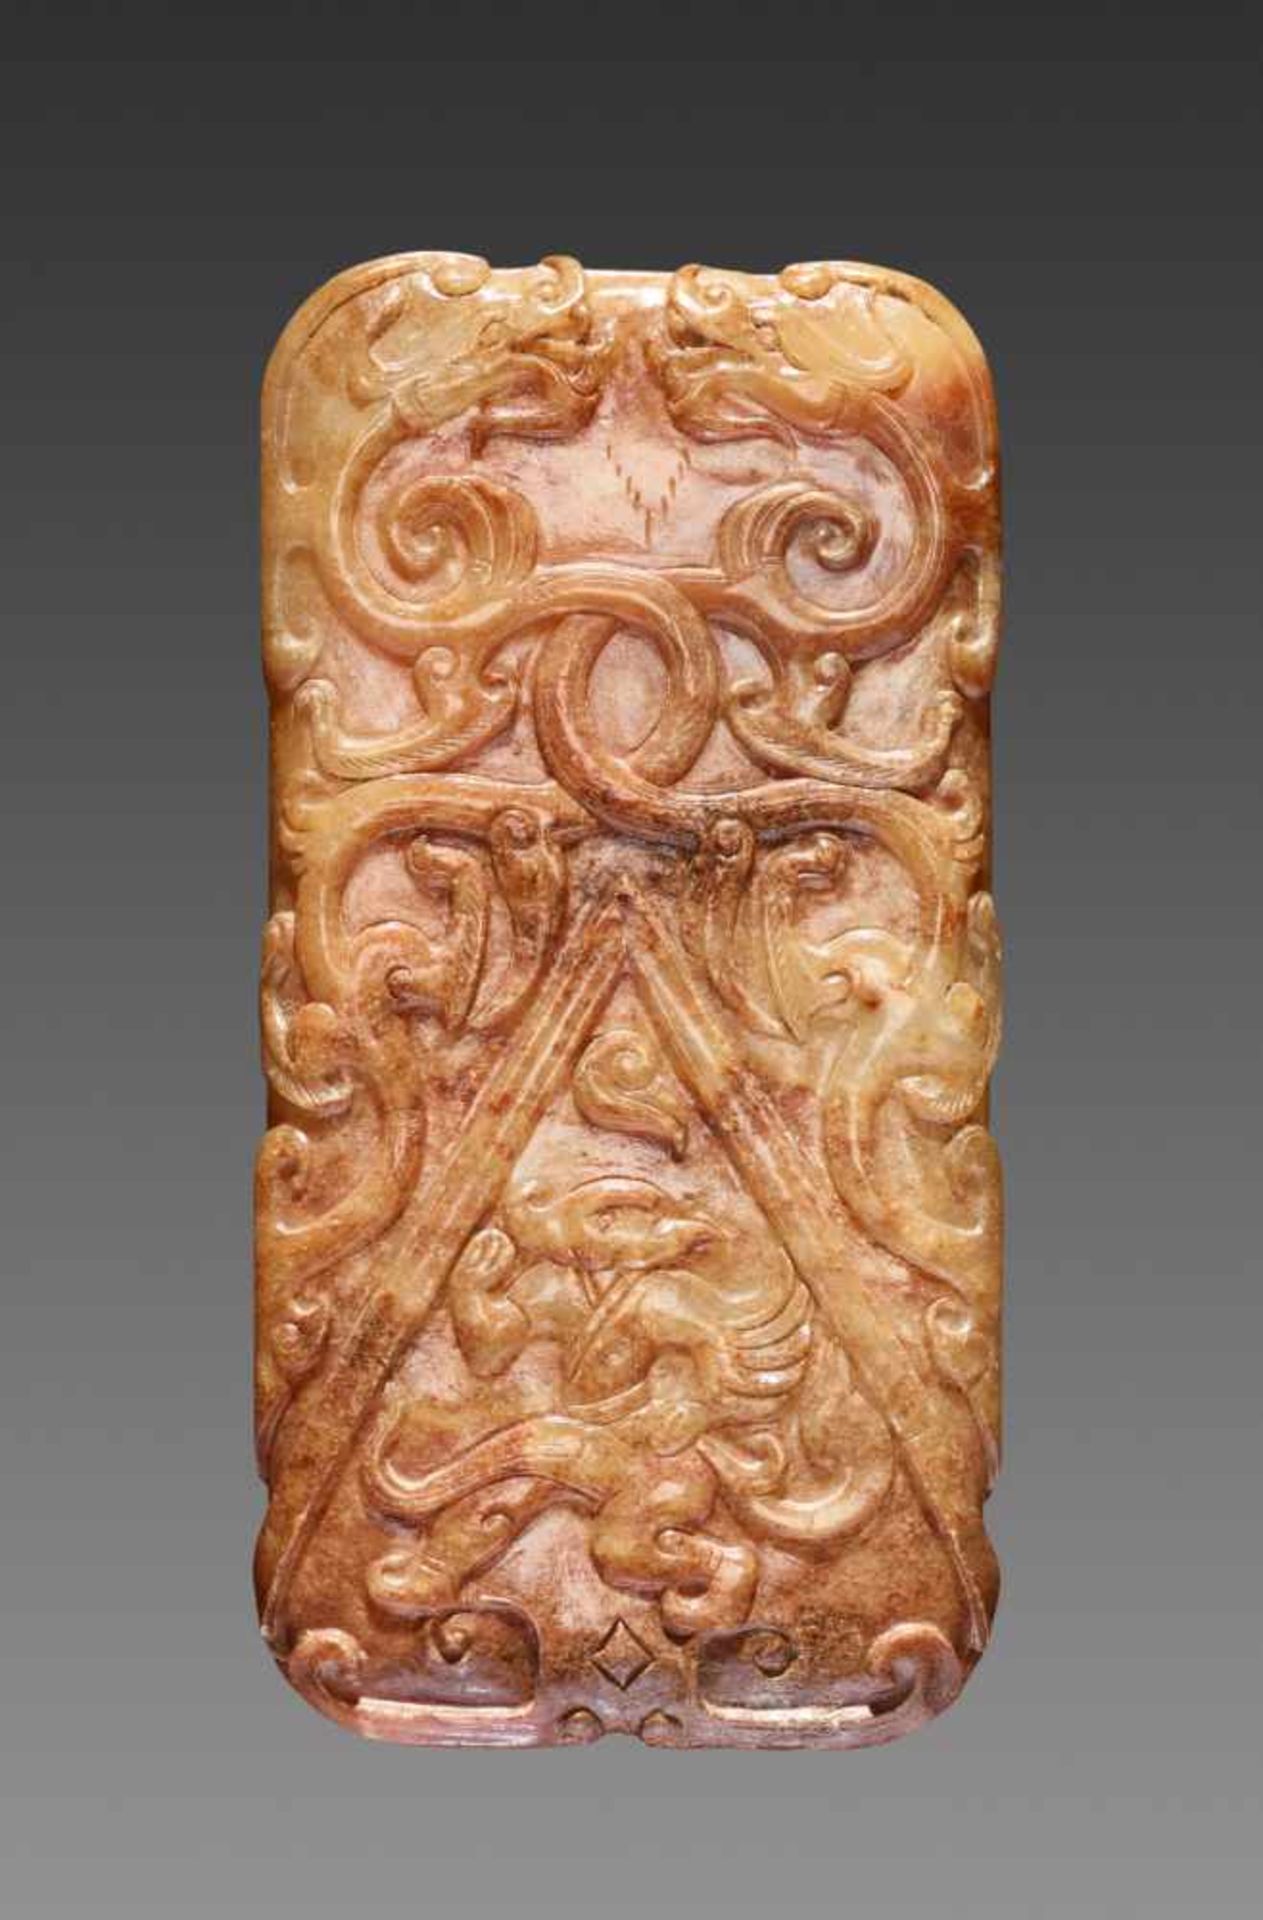 A RARE AND EXQUISITE HAN DYNASTY RECTANGULAR PENDANT IN WHITE AND RUSSET JADE CARVED WITH DRAGONS